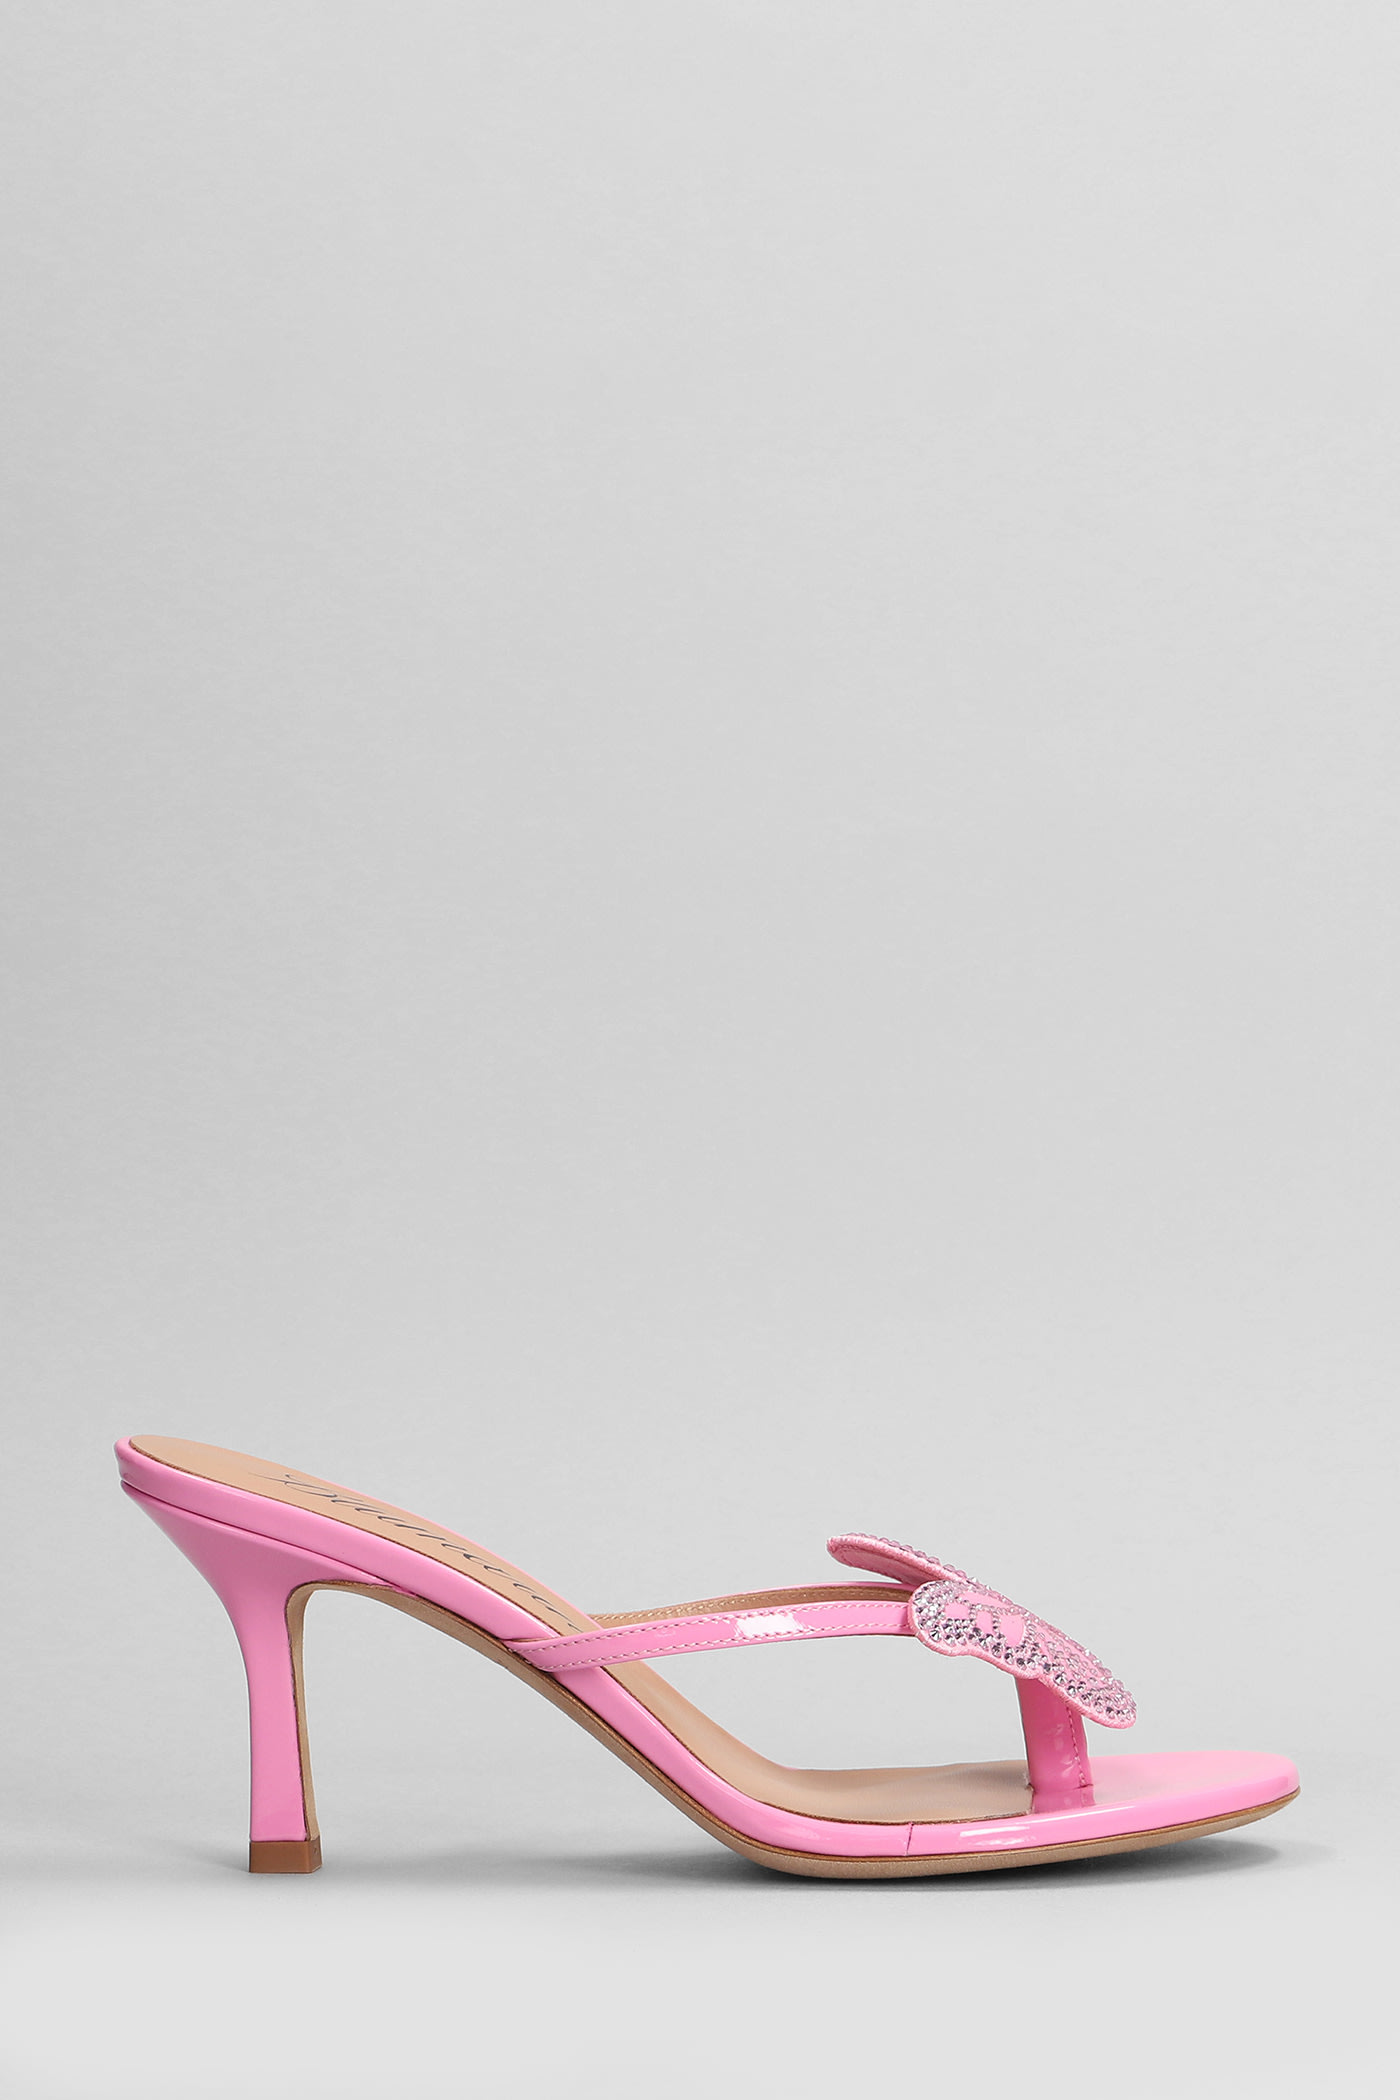 Butterfly Slipper-mule In Rose-pink Patent Leather